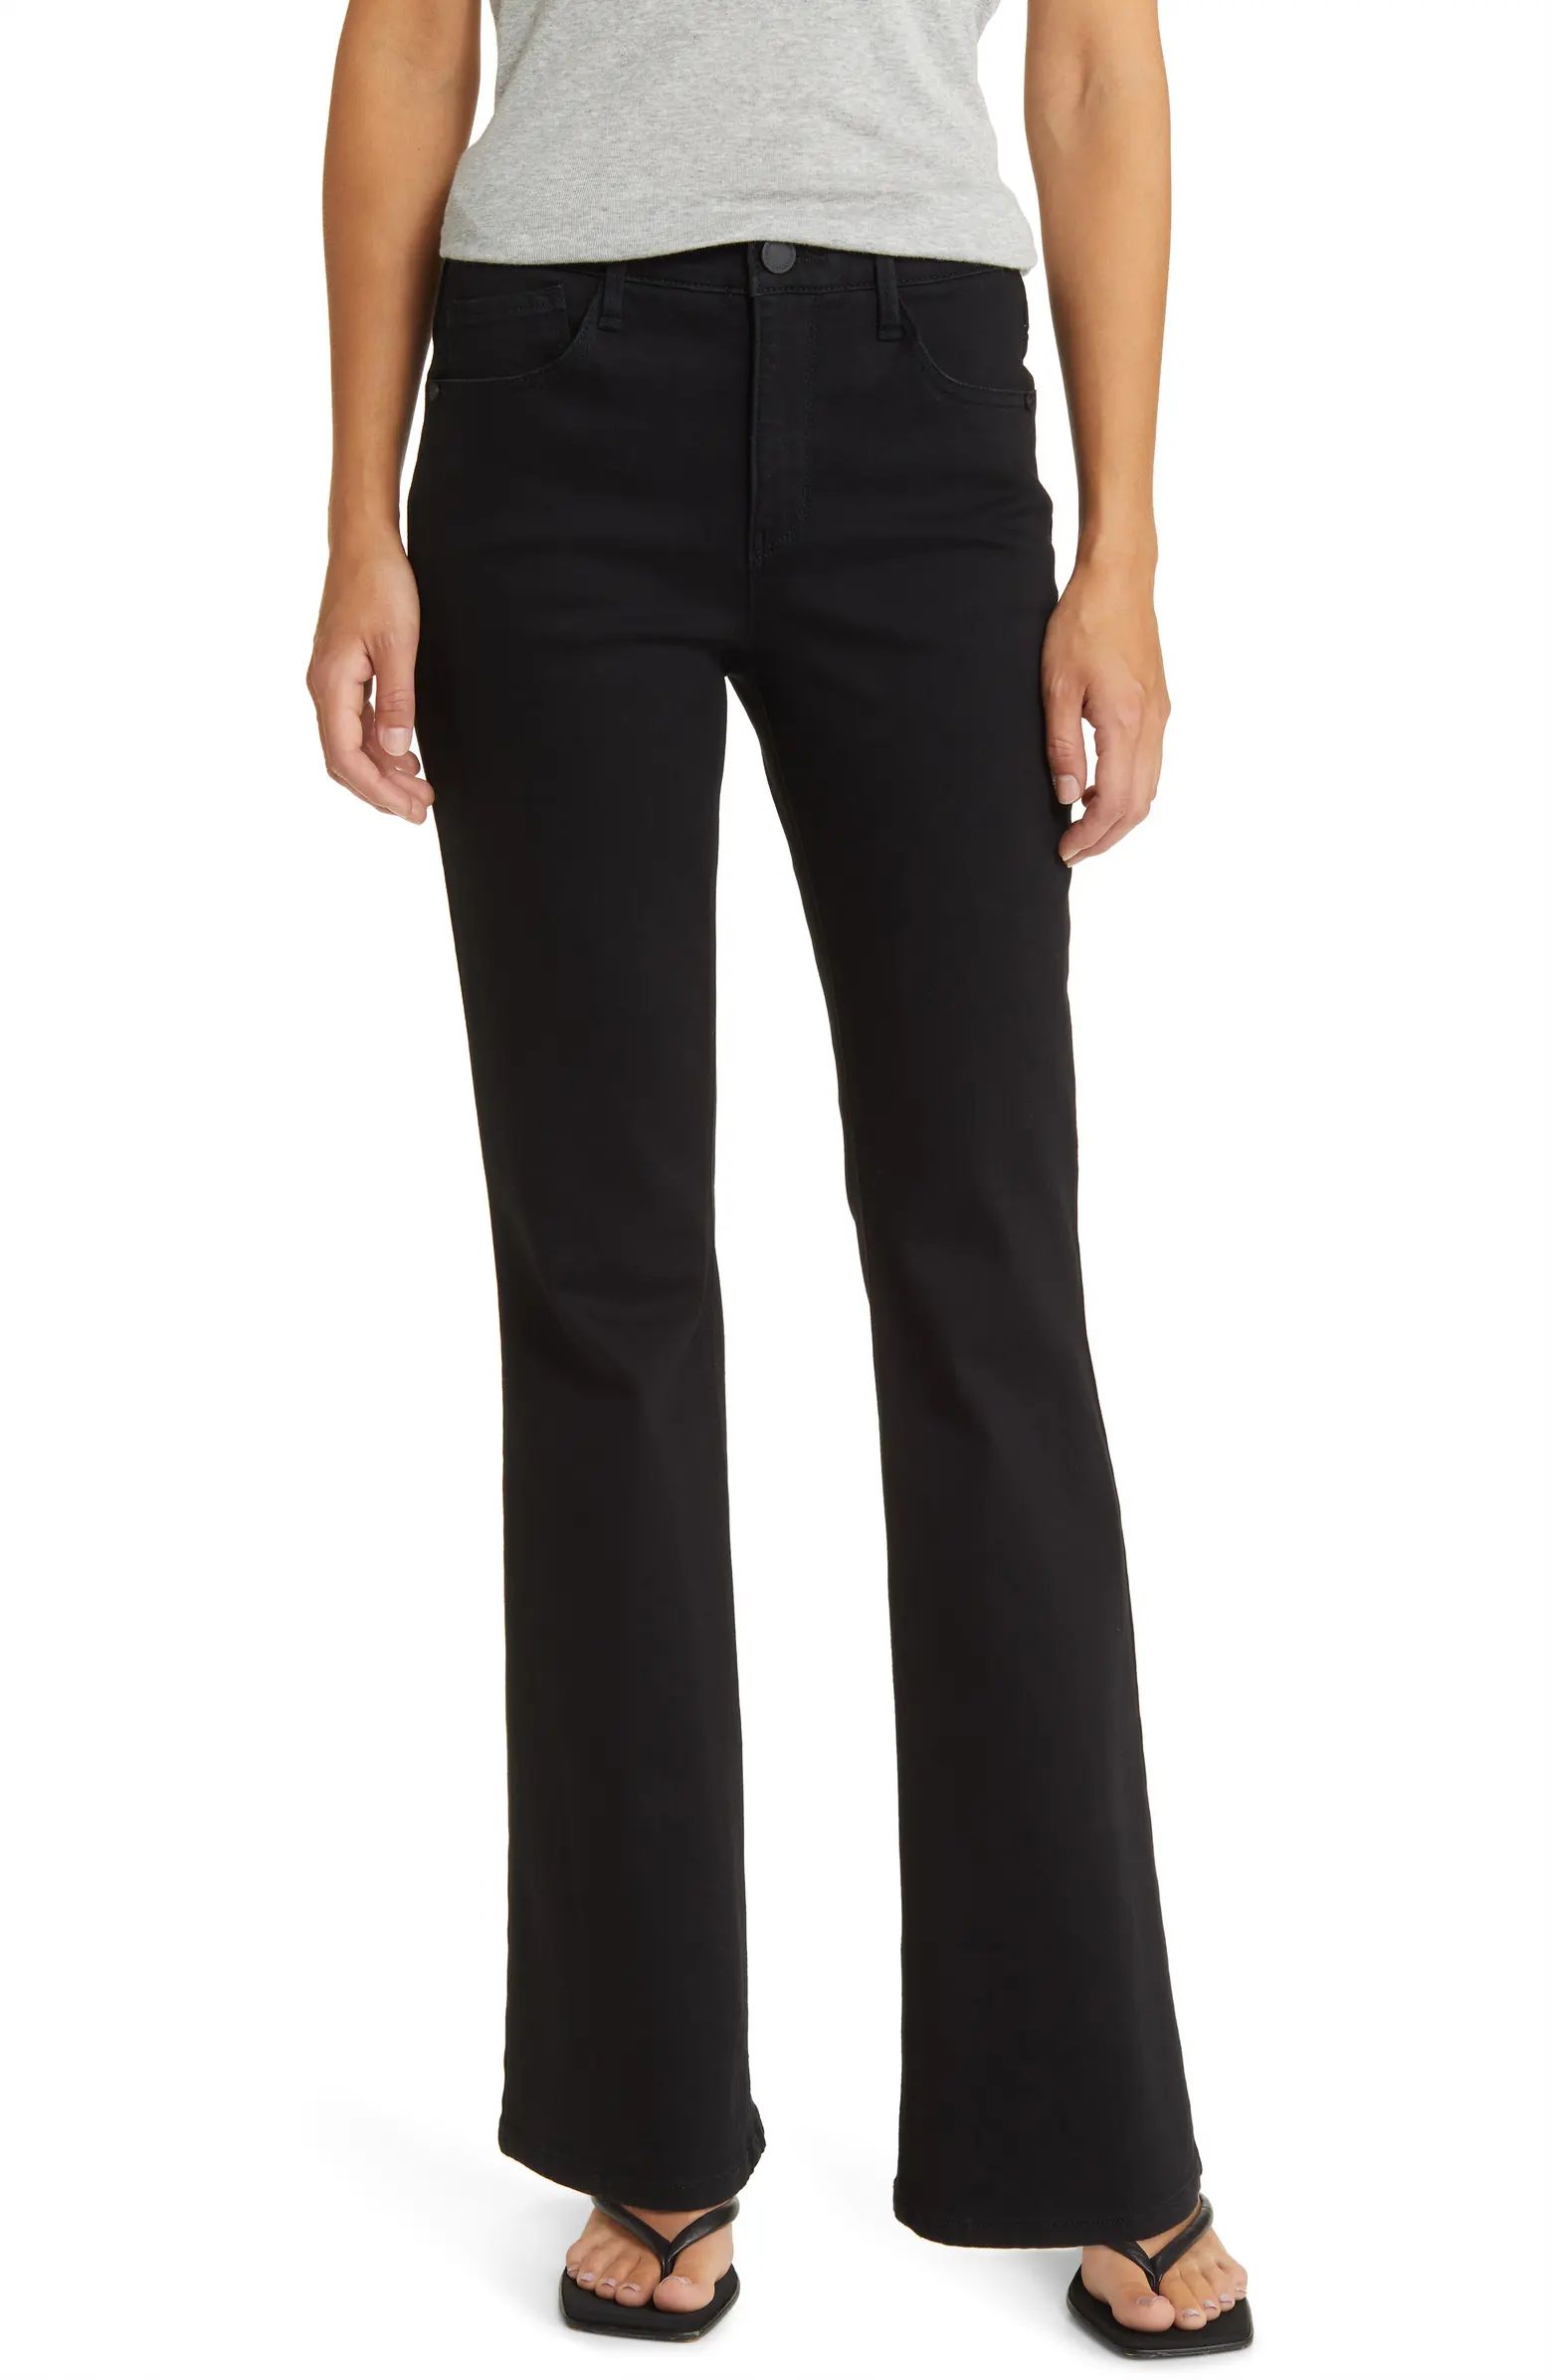 'Ab'Solution High Waist Flare Jeans | Nordstrom